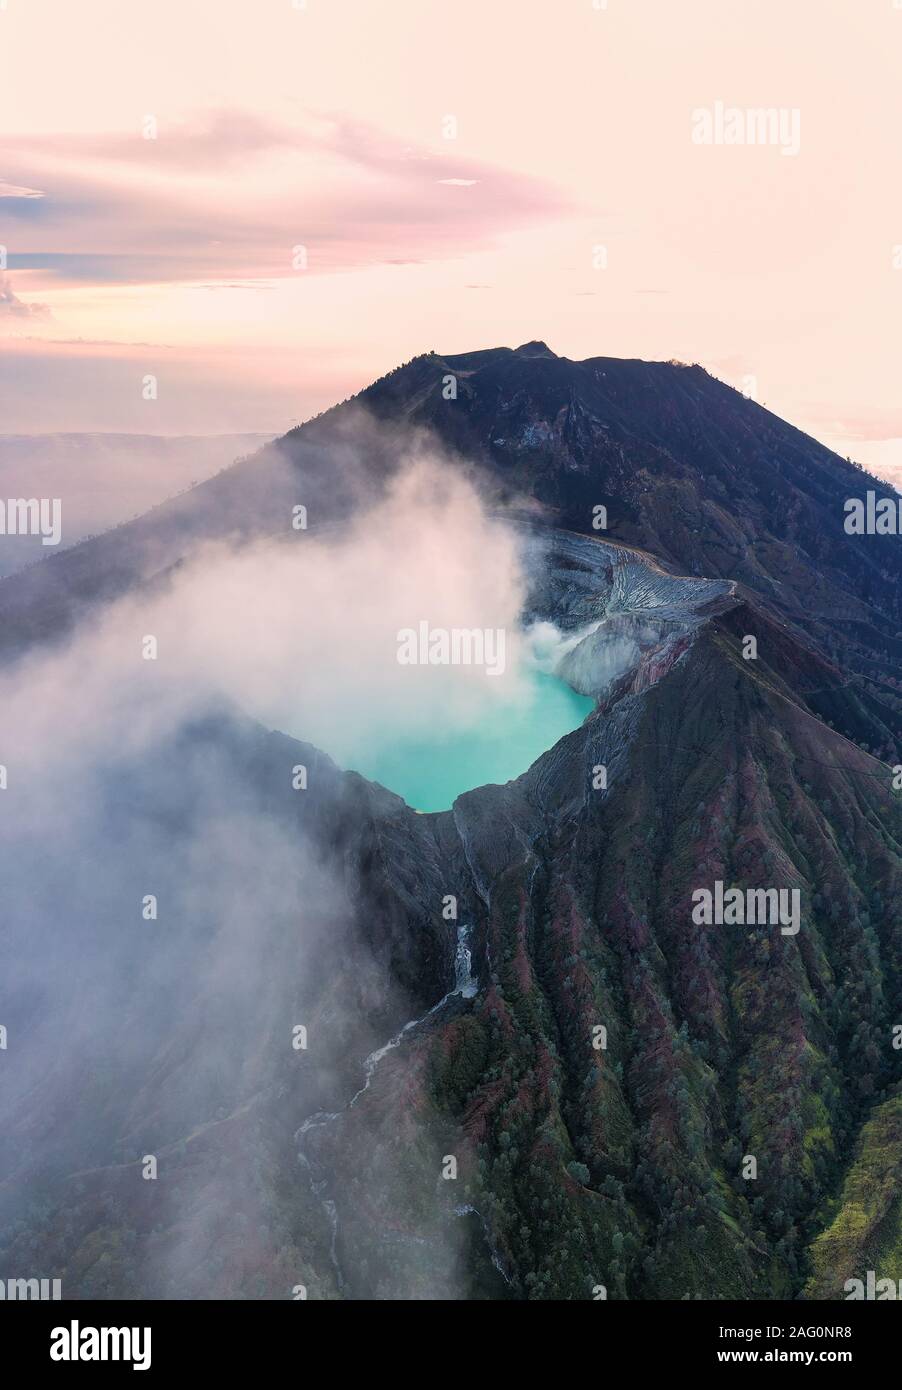 Stunning sunrise over the Ijen volcano with the beautiful turquoise-coloured acidic crater lake. The Ijen volcano complex is a group of composite volc Stock Photo